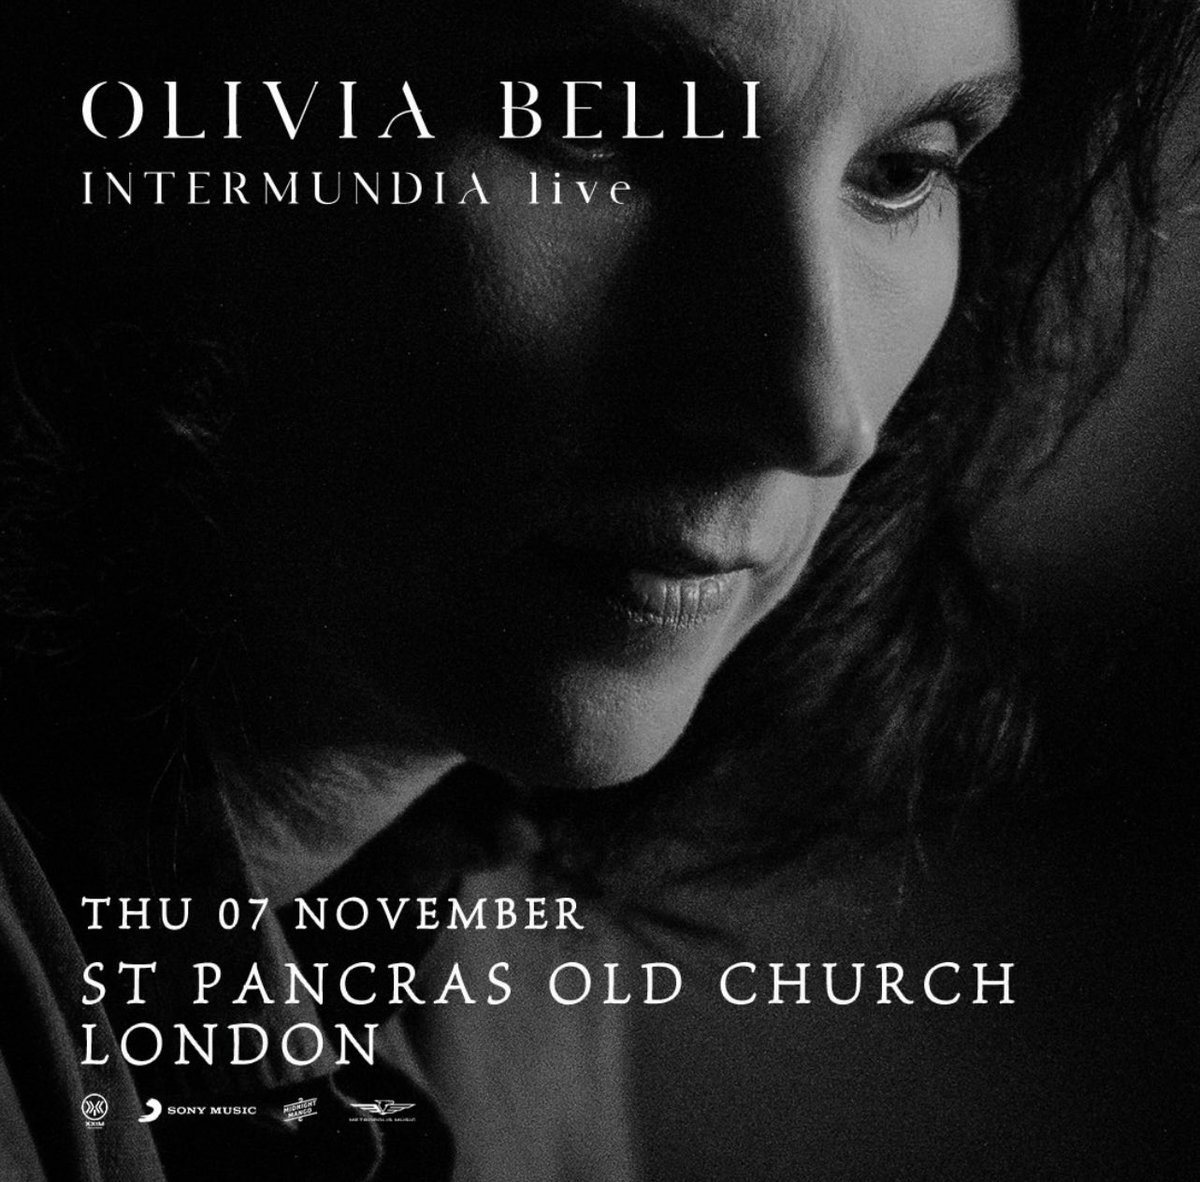 UK followers get a unique code to gain early access to the presale - April 16 - 10am. You just need to subscribe at my newsletter And we will send it oliviabelli.com/newsletter @MetropolisMusic